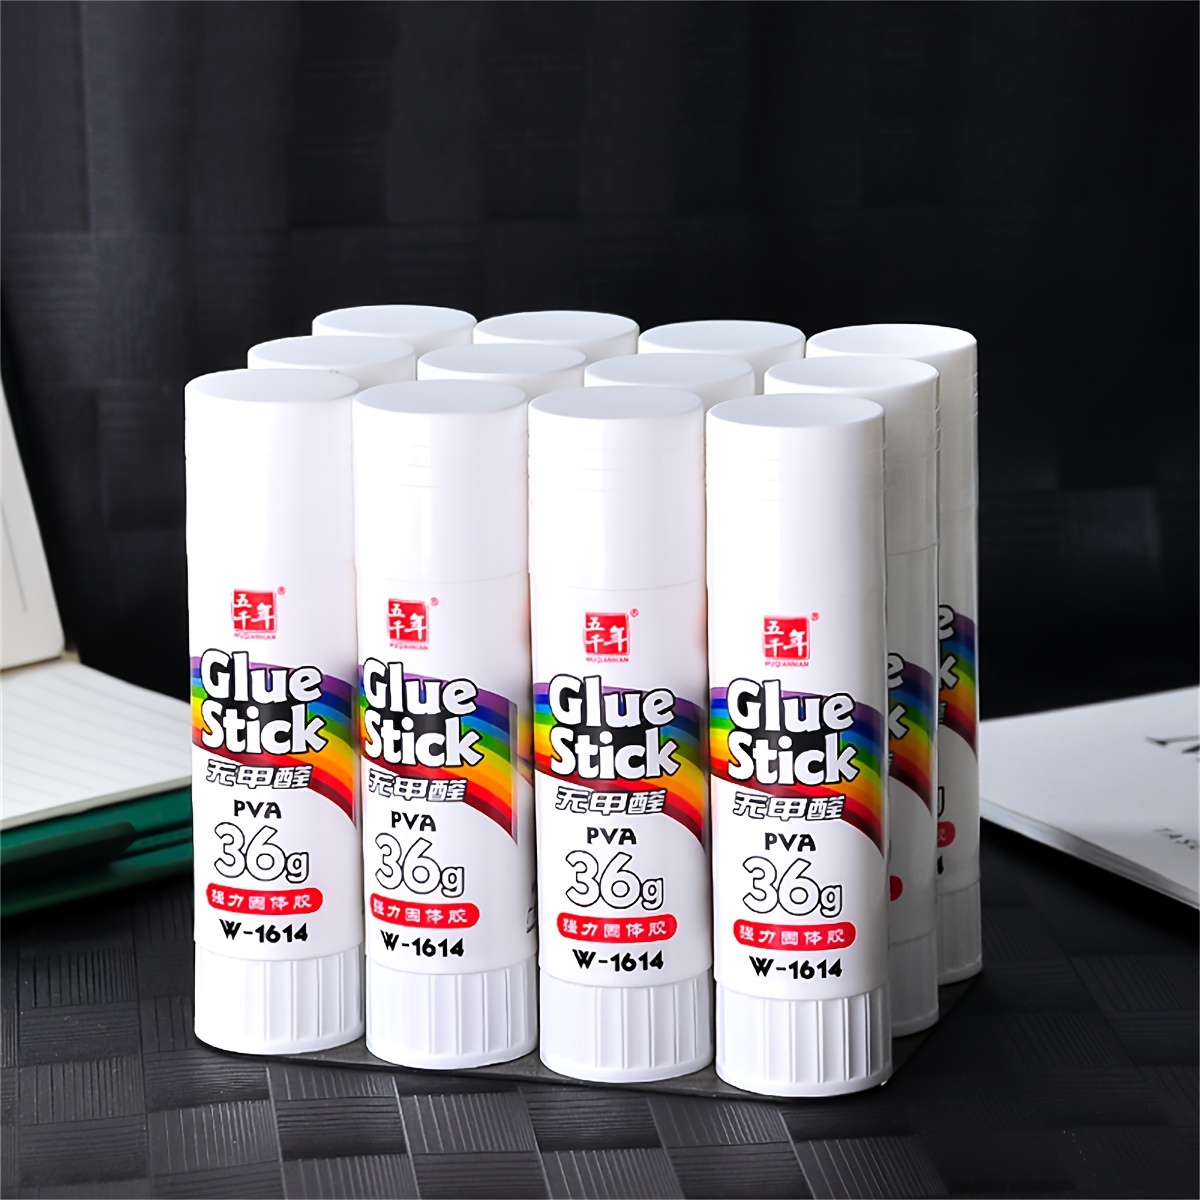 

8-piece High-strength Solid Glue Sticks, 9g/15g/21g/36g - Odorless & Transparent, Perfect For School Projects & Office Use